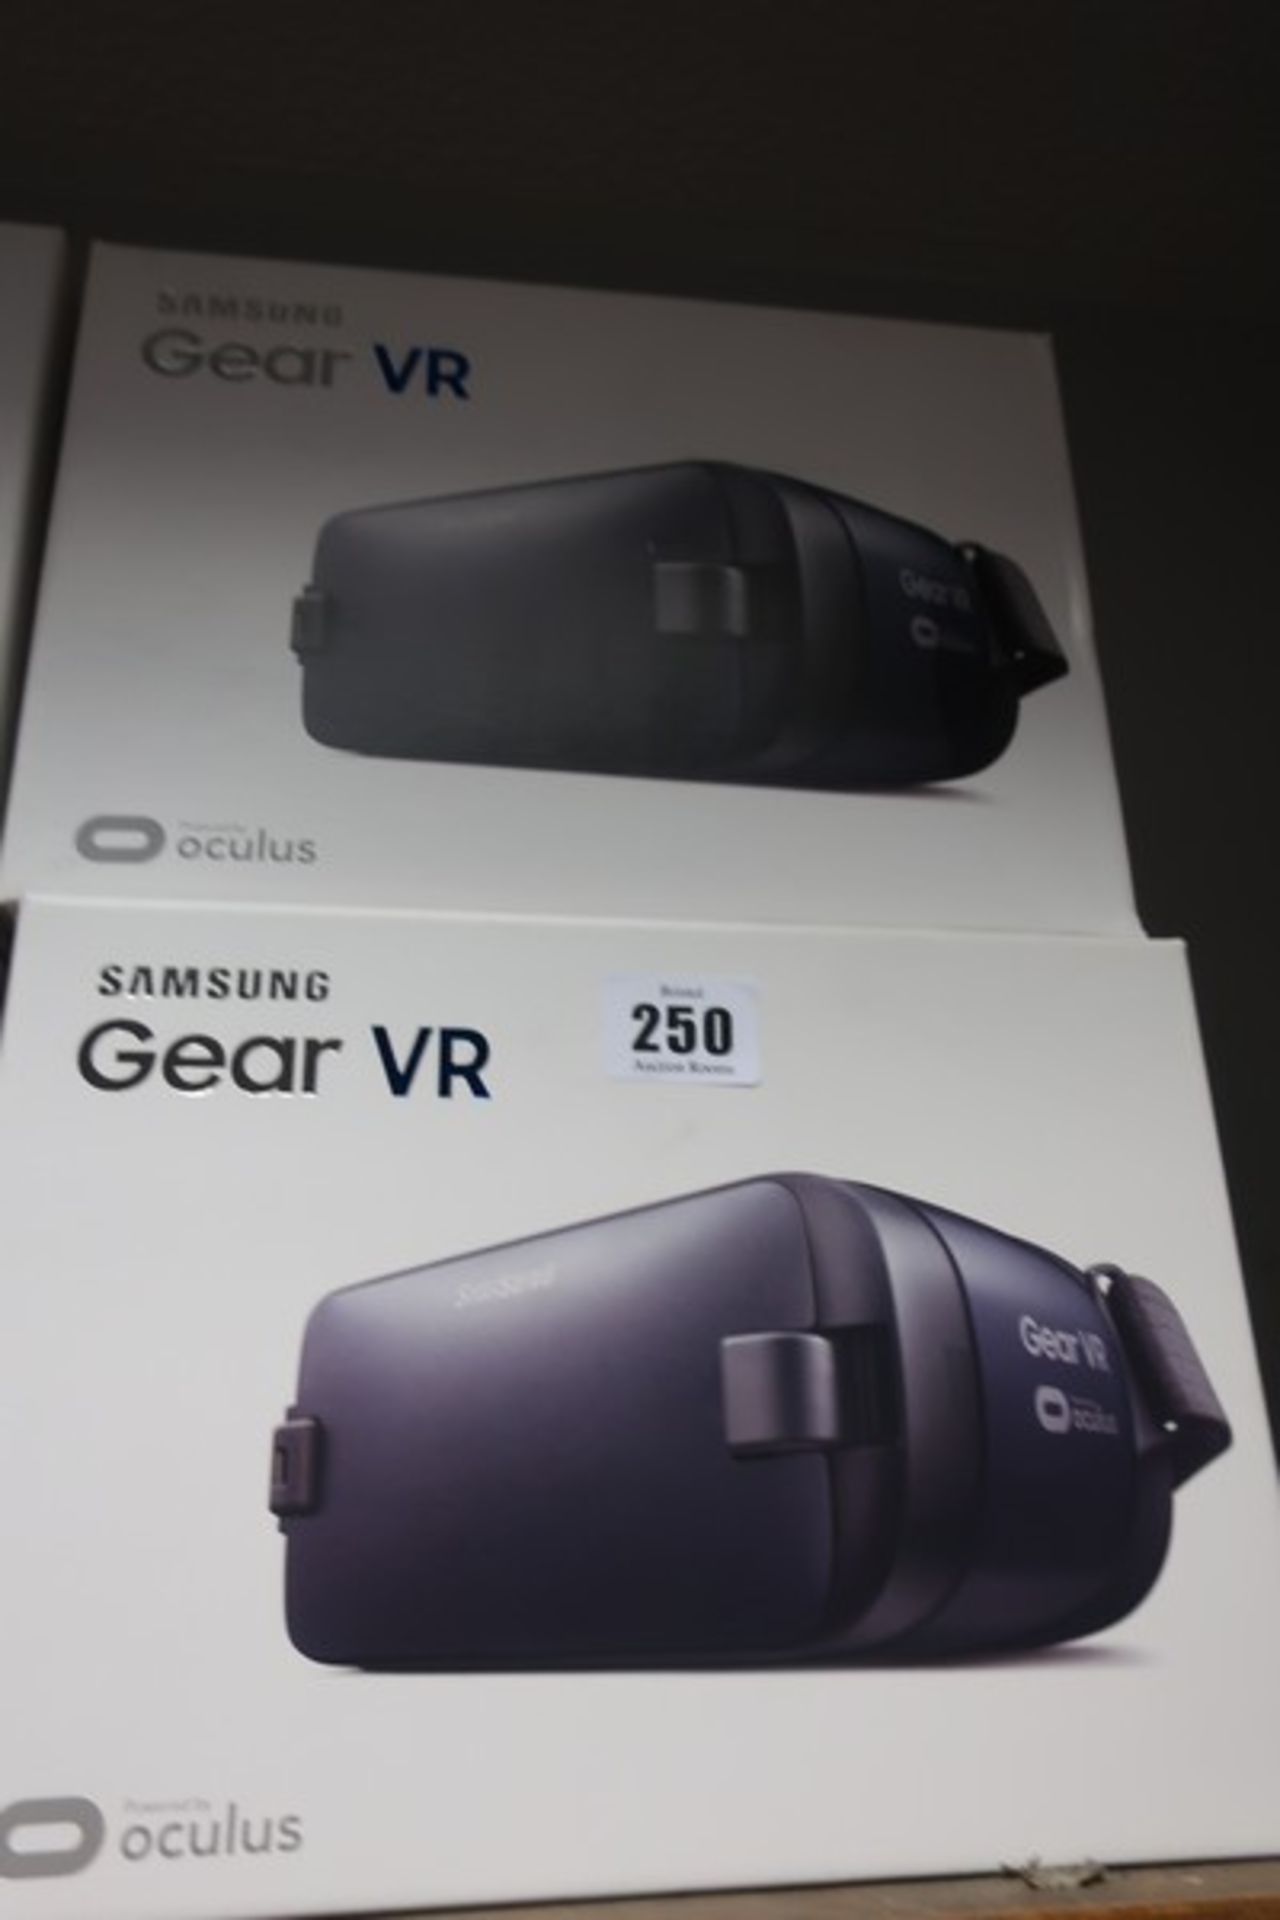 Four boxed as new Samsung Gear VR headsets.